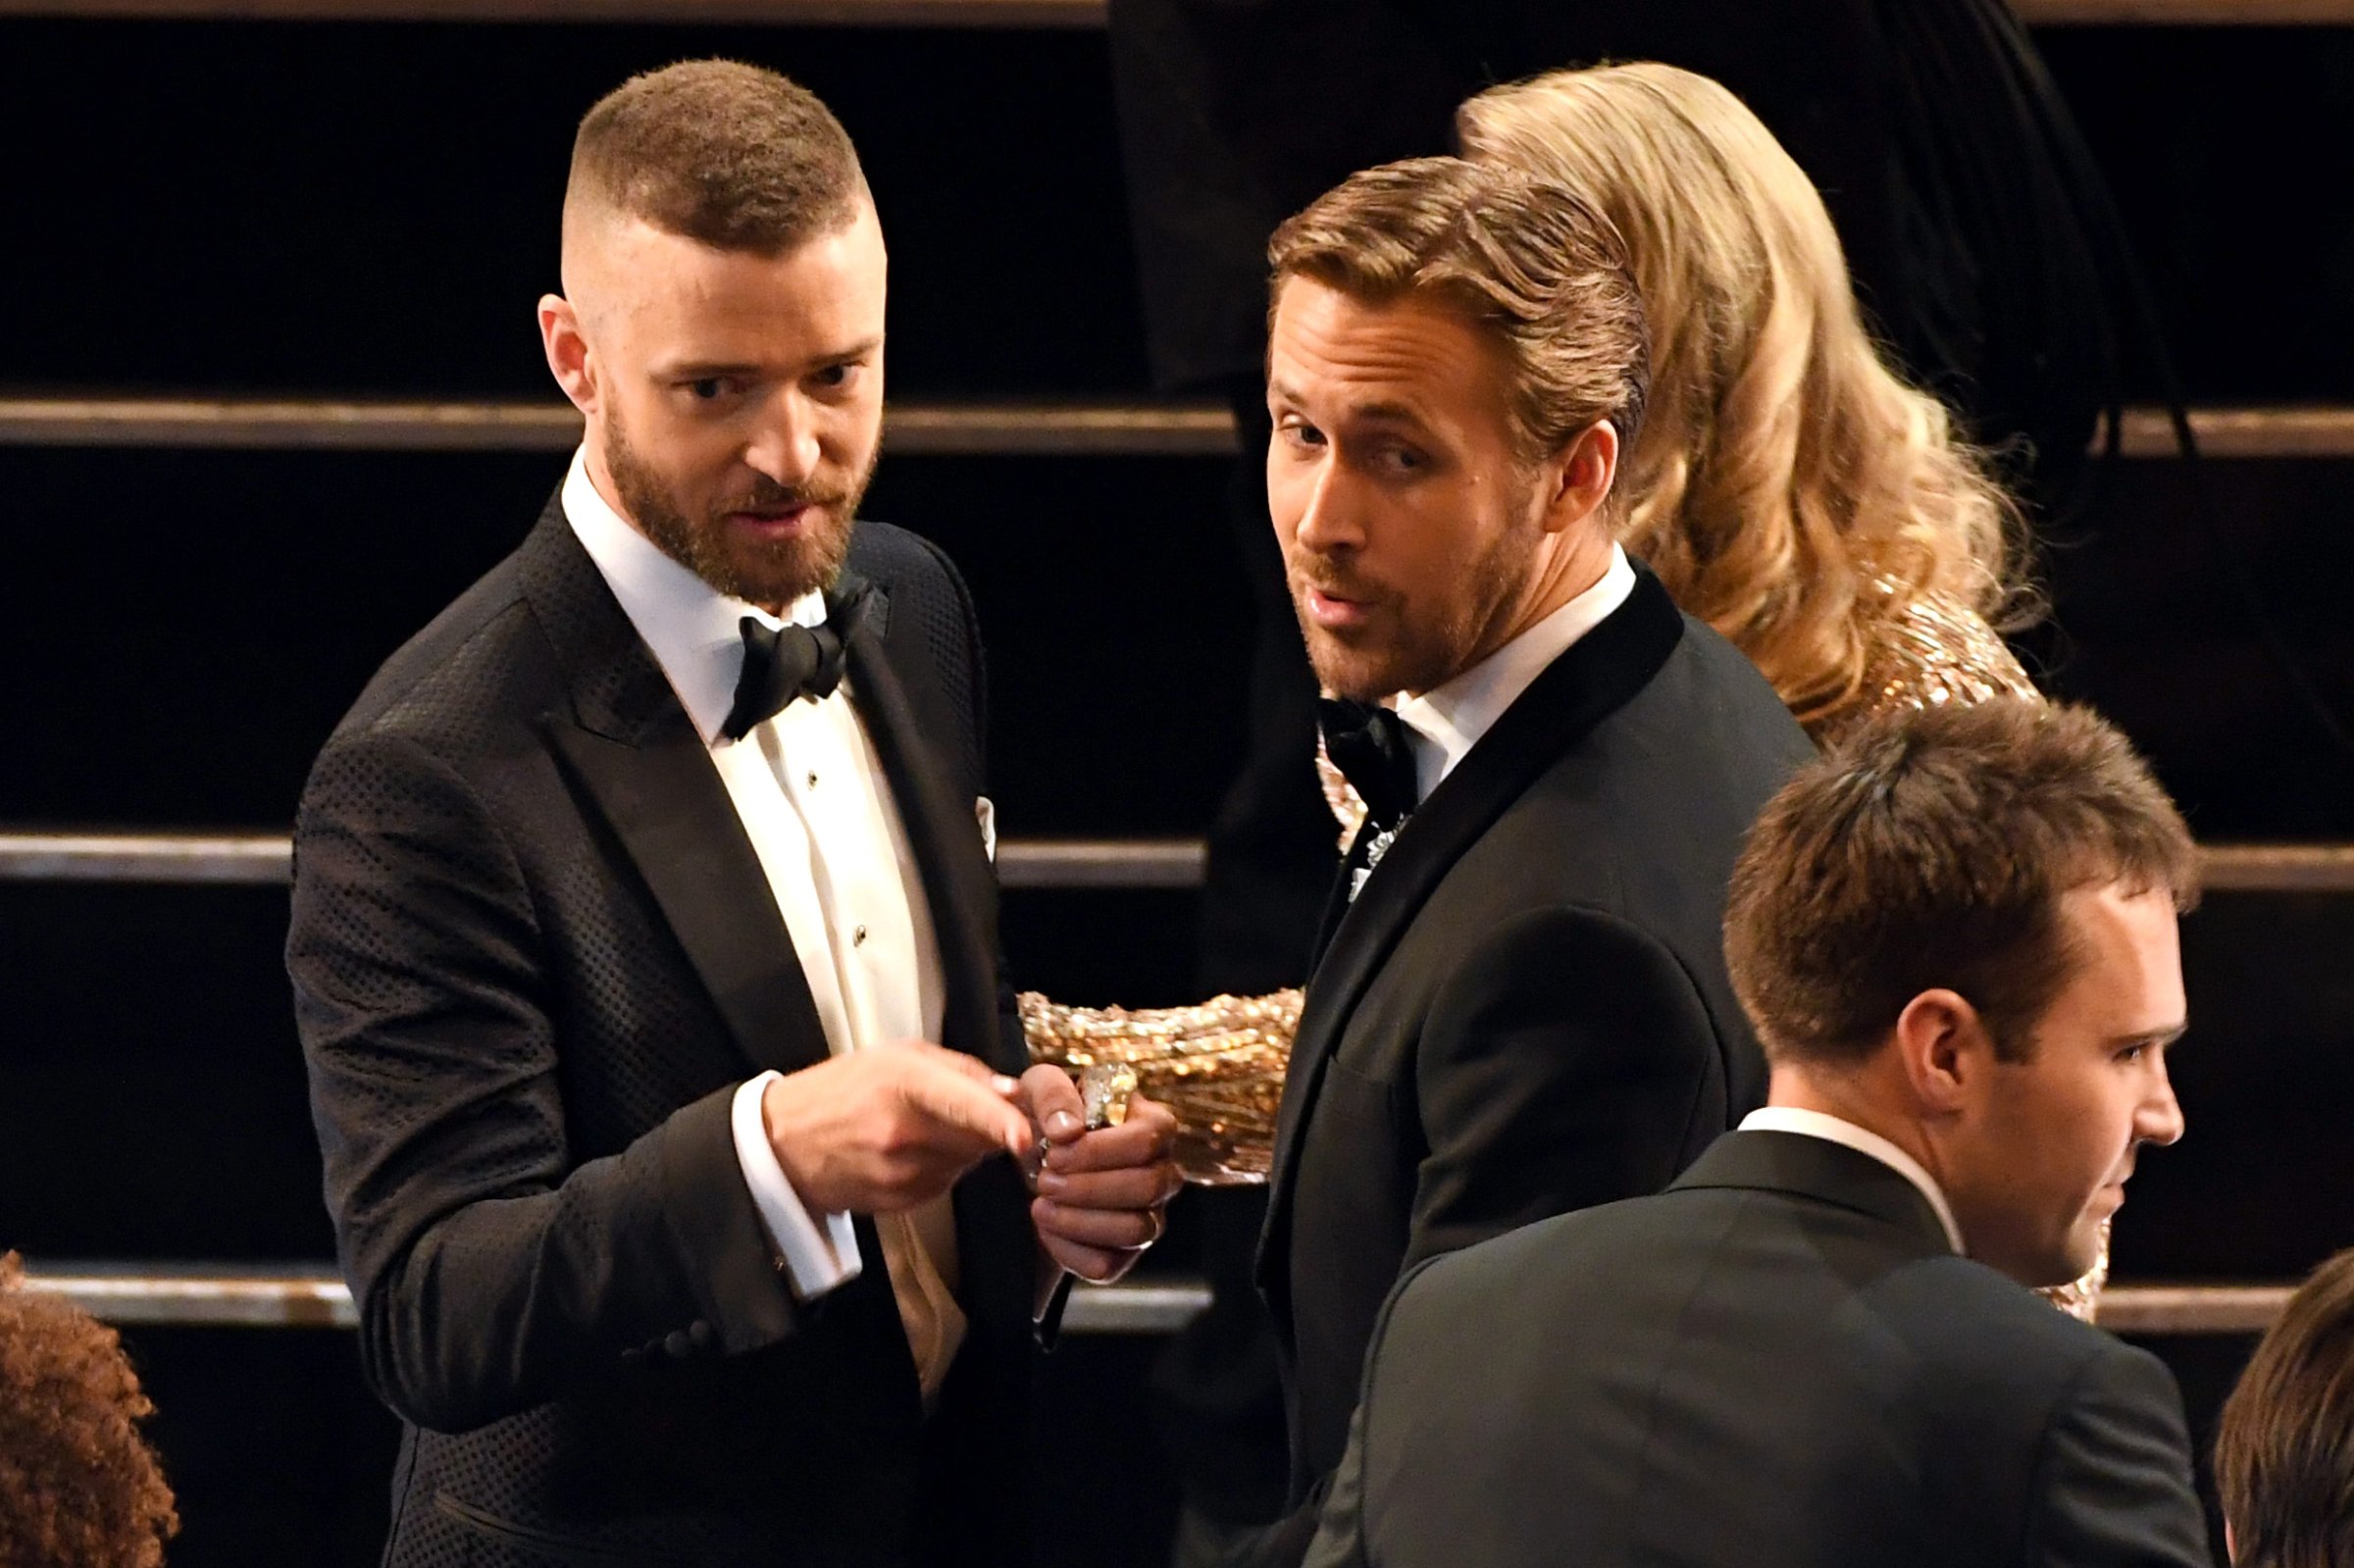 Justin Timberlake and Ryan Gosling during the 89th Annual Academy Awards, on Feb. 26, 2017 in Hollywood, Calif.